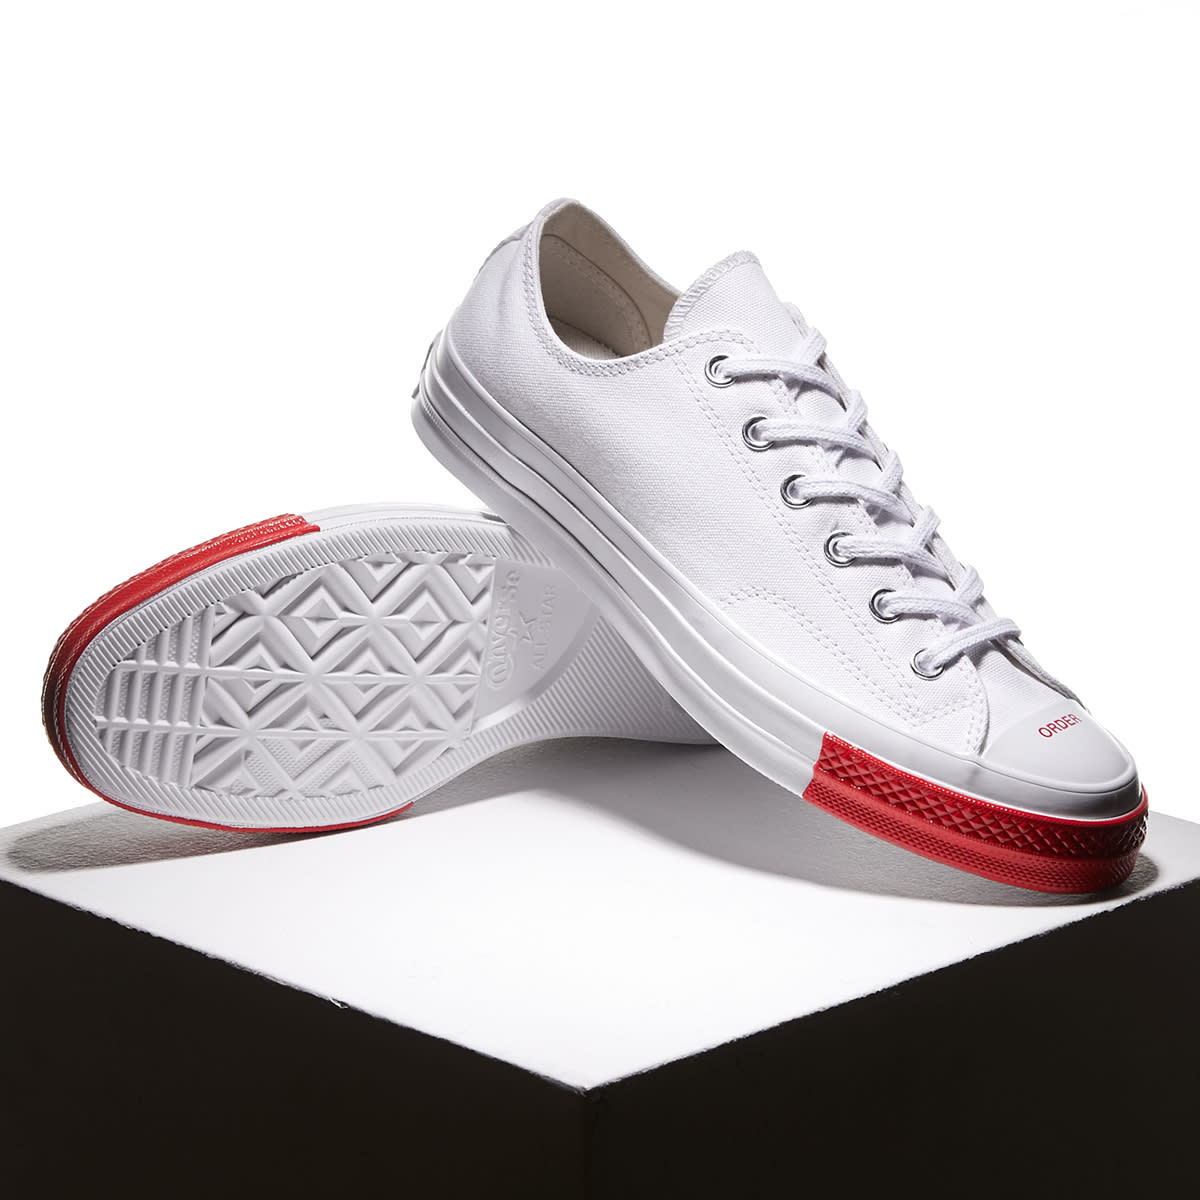 Converse x Undercover Chuck Taylor 1970s Ox (White & Red) | END. Launches